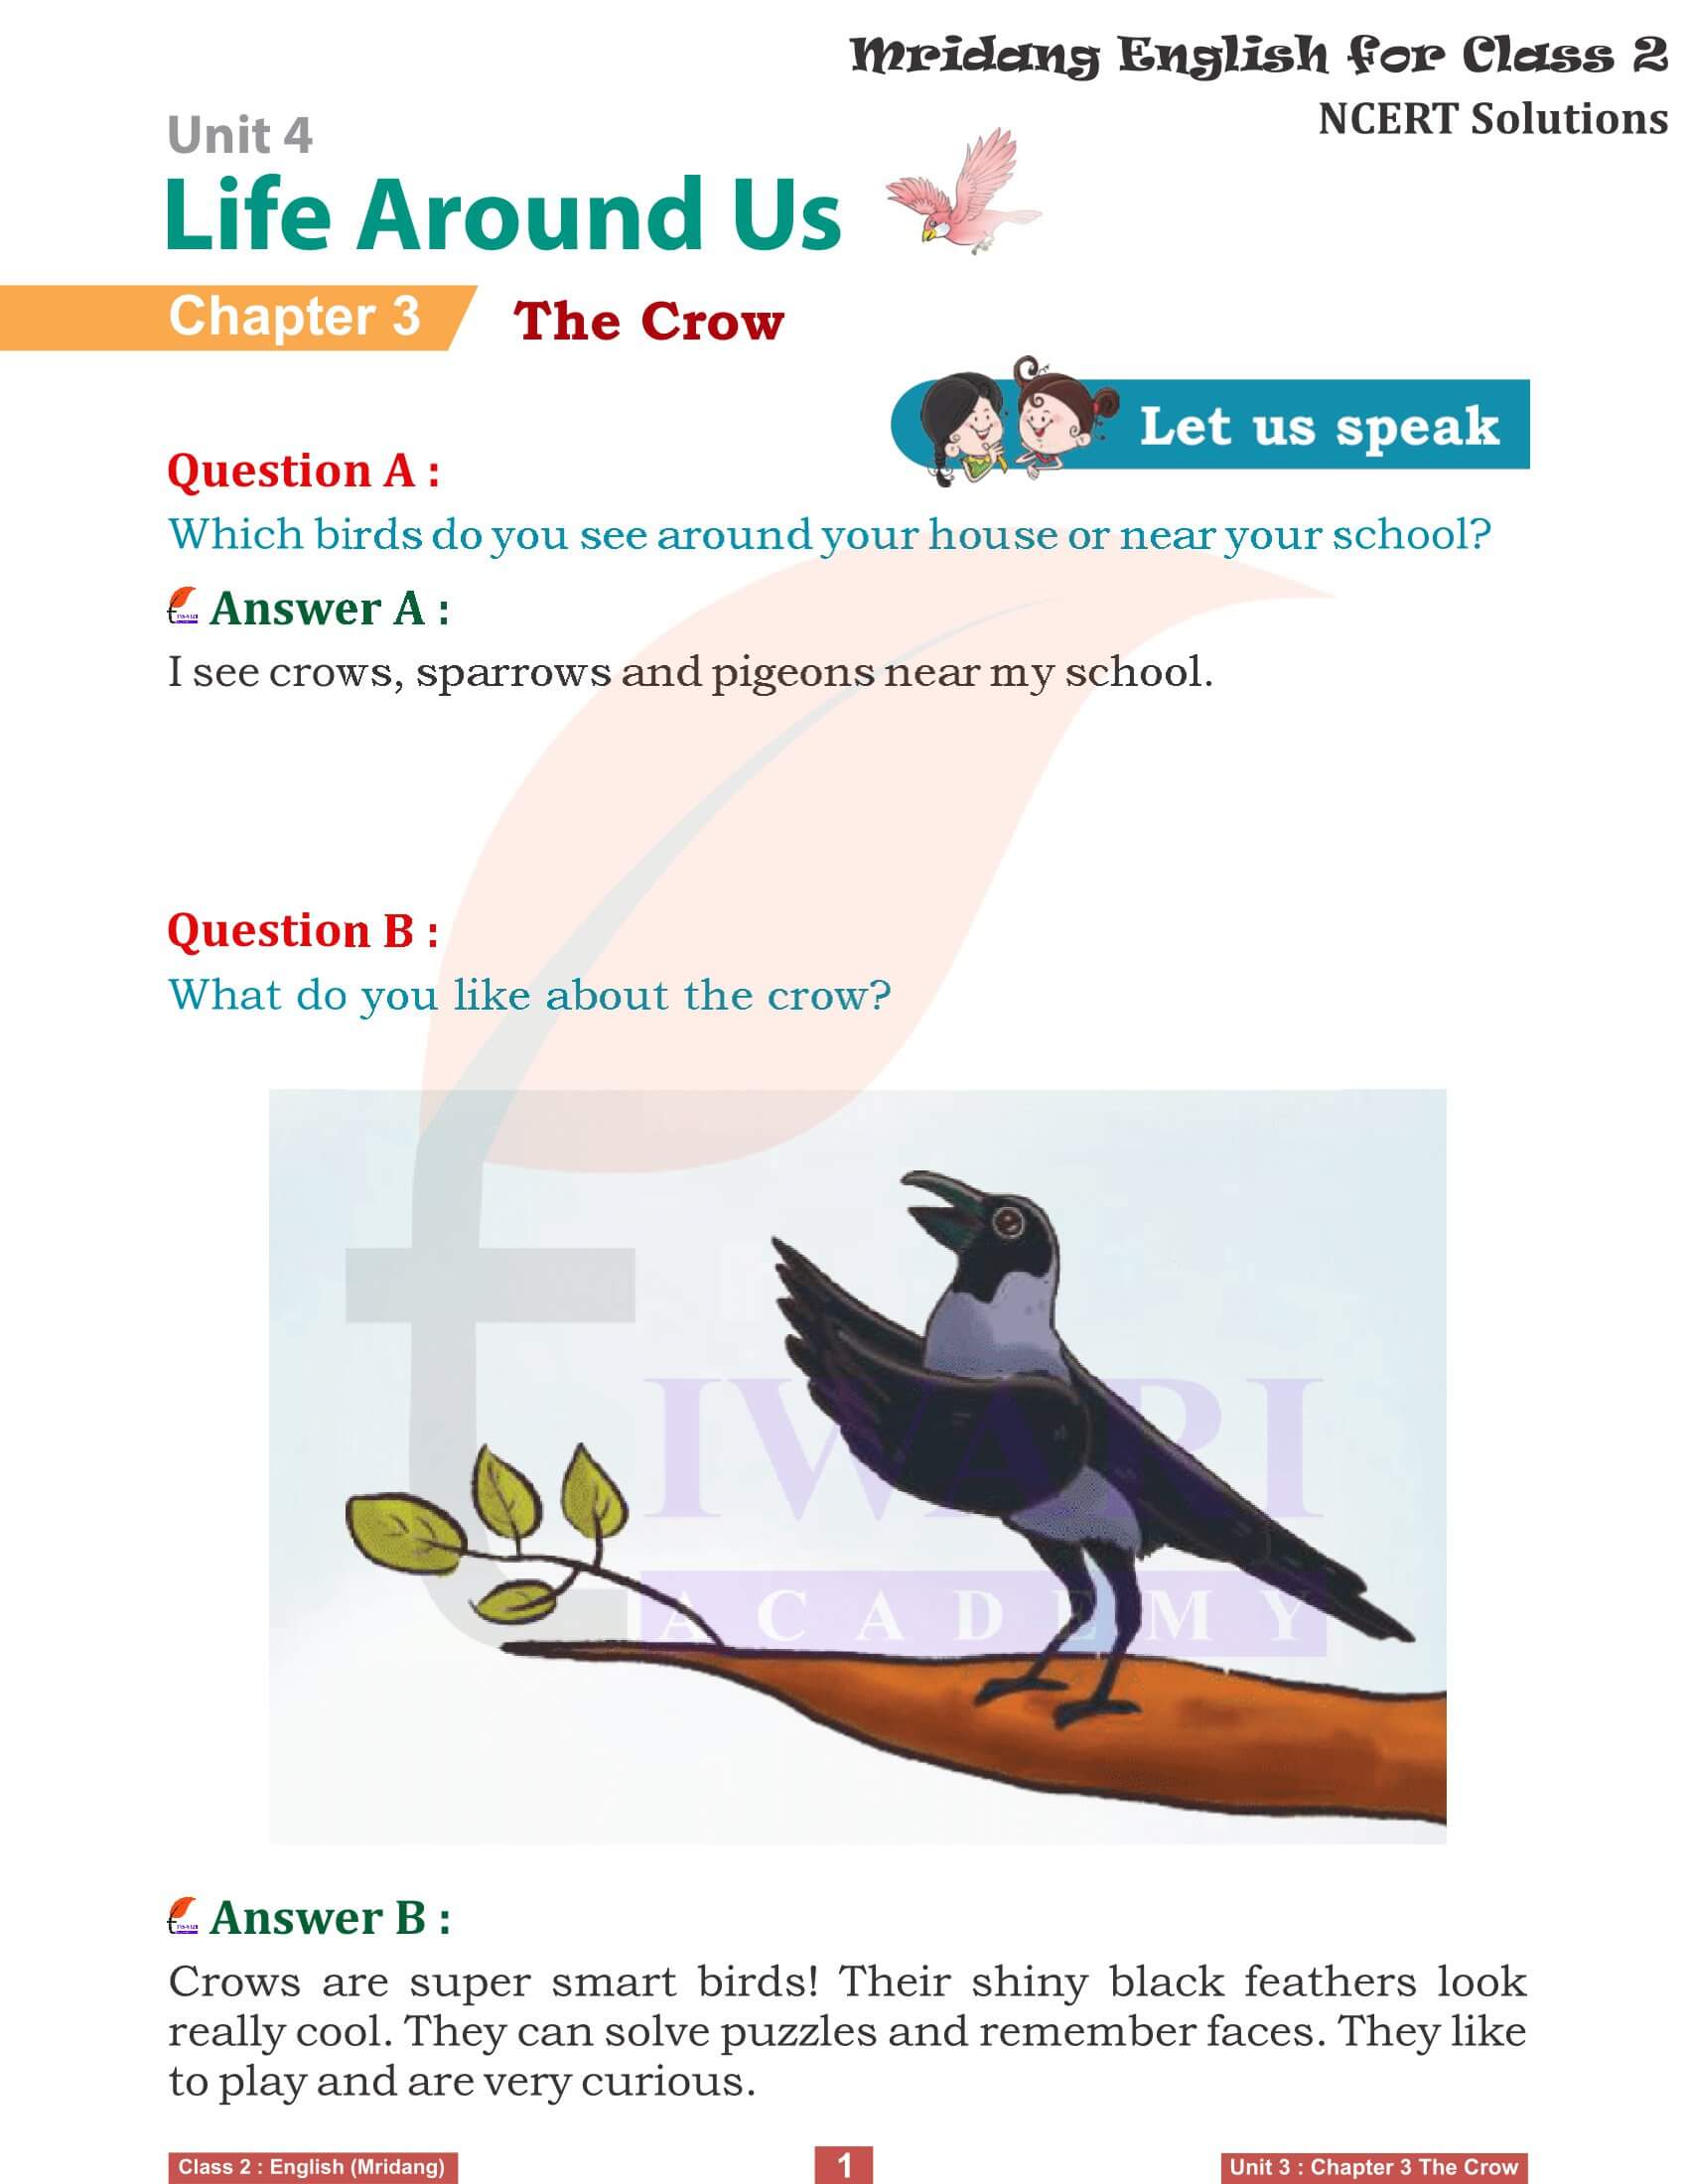 NCERT Solutions for Class 2 English Mridang Unit 4 Life Around Us Chapter 3 The Crow